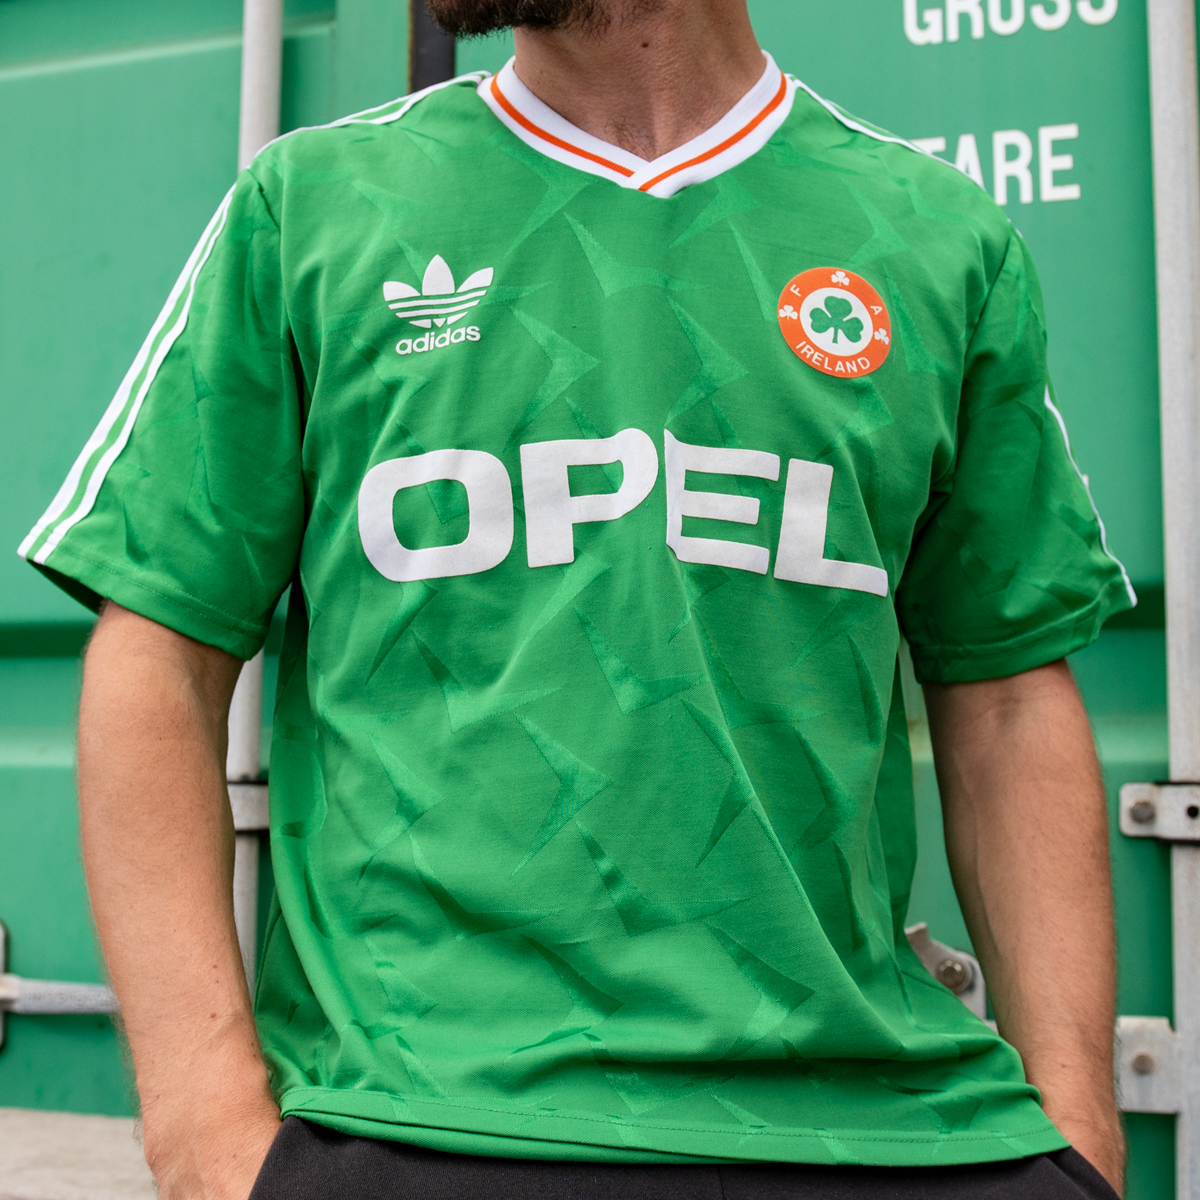 Fusión cheque engañar Classic Football Shirts on Twitter: "Ireland 1990 Home by Adidas 🇮🇪  Glorious home shirt worn at the 1990 World Cup where they reached the  Quarter Finals. Hitting the site on August 11th